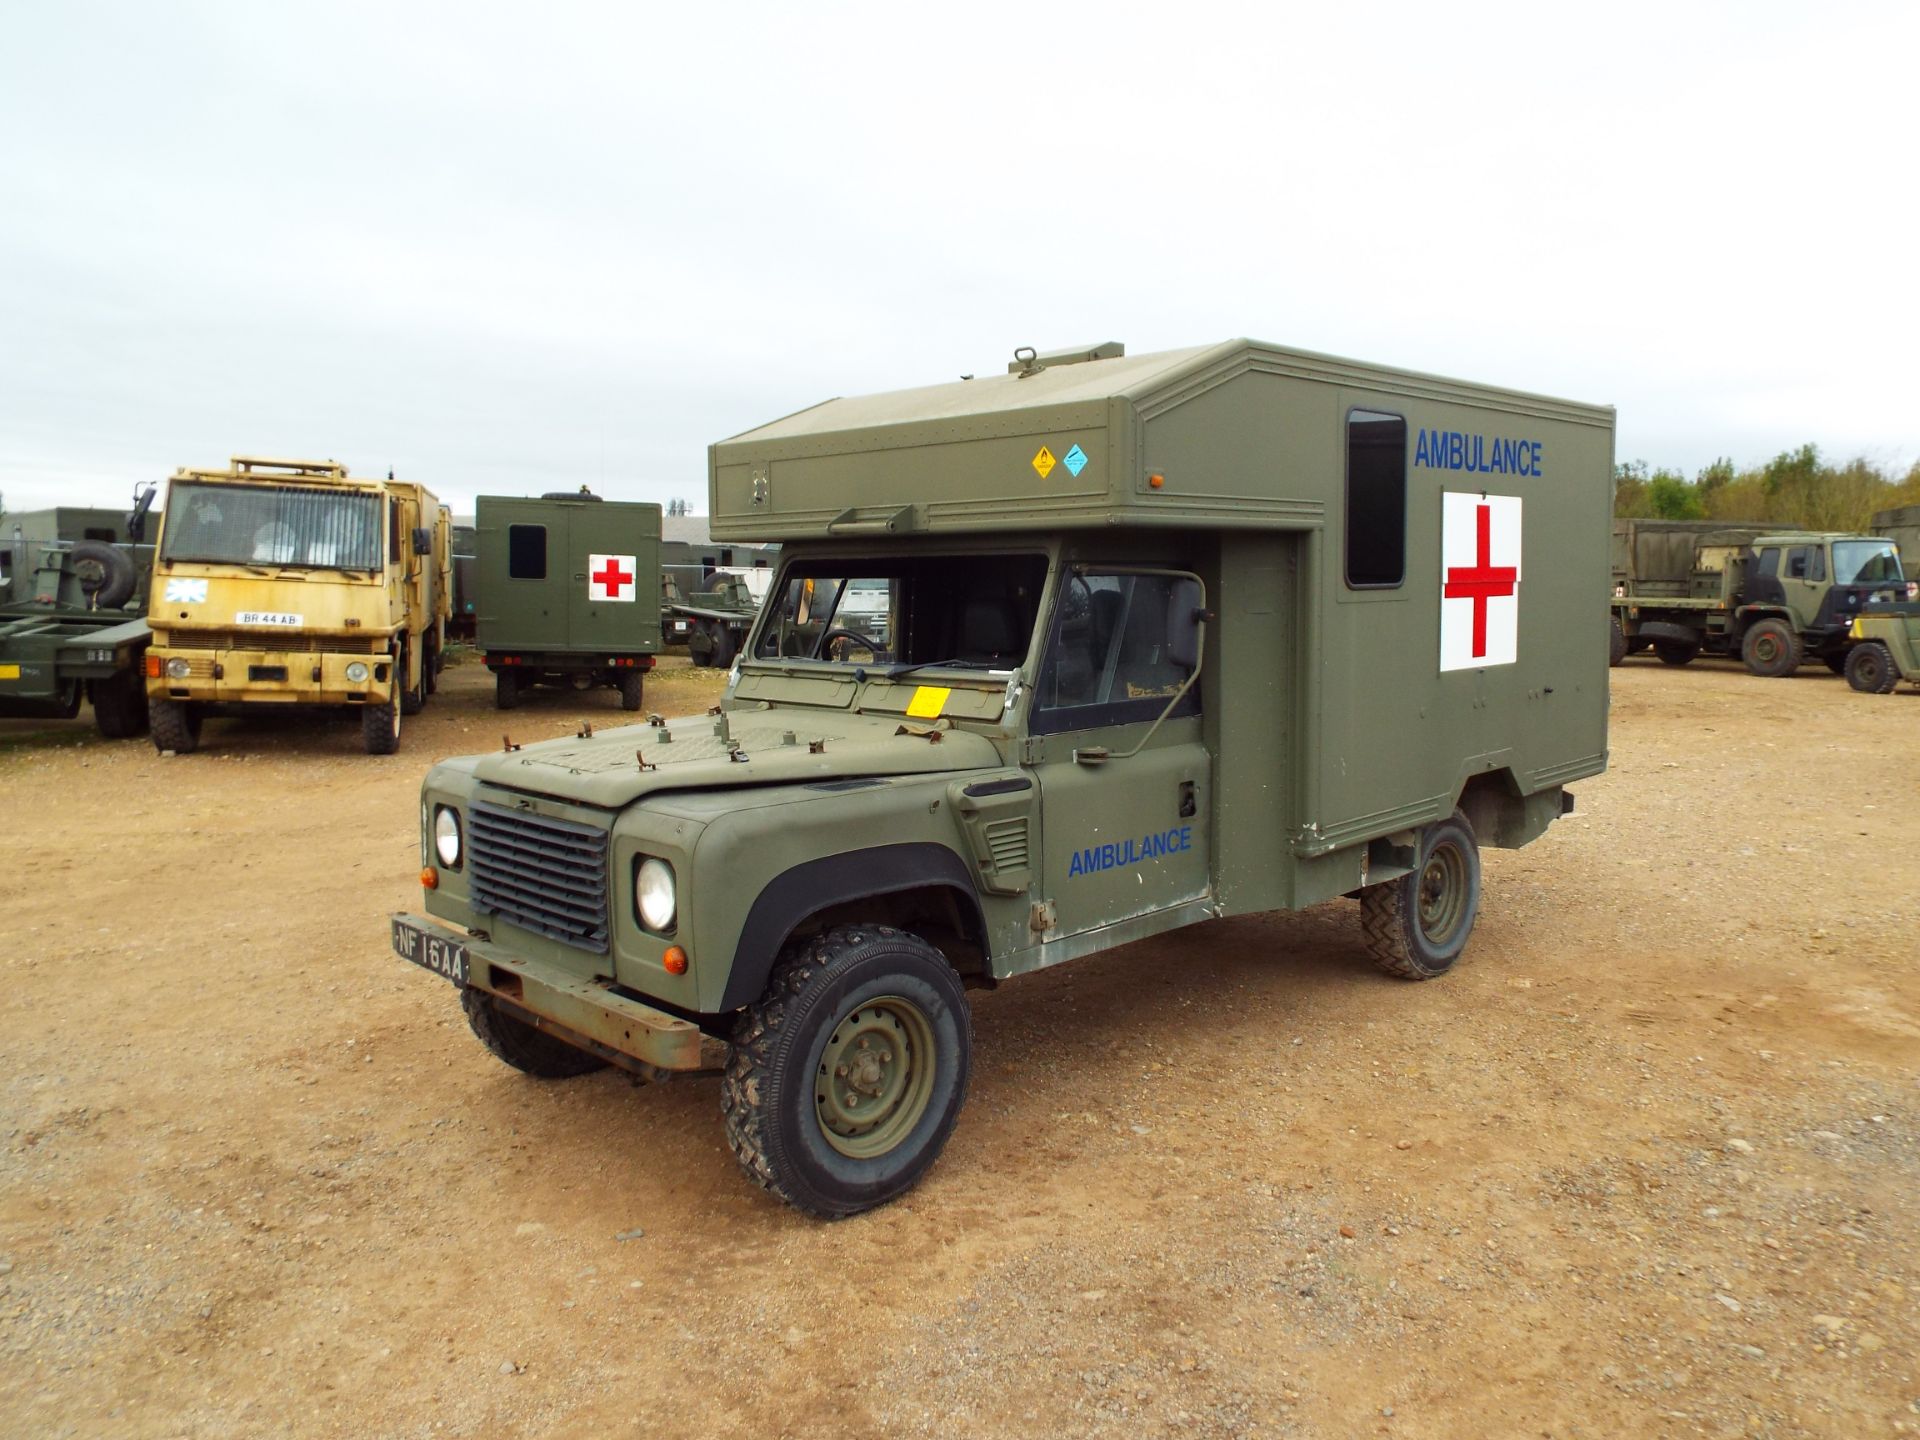 Military Specification Land Rover Wolf 130 ambulance - Image 3 of 28